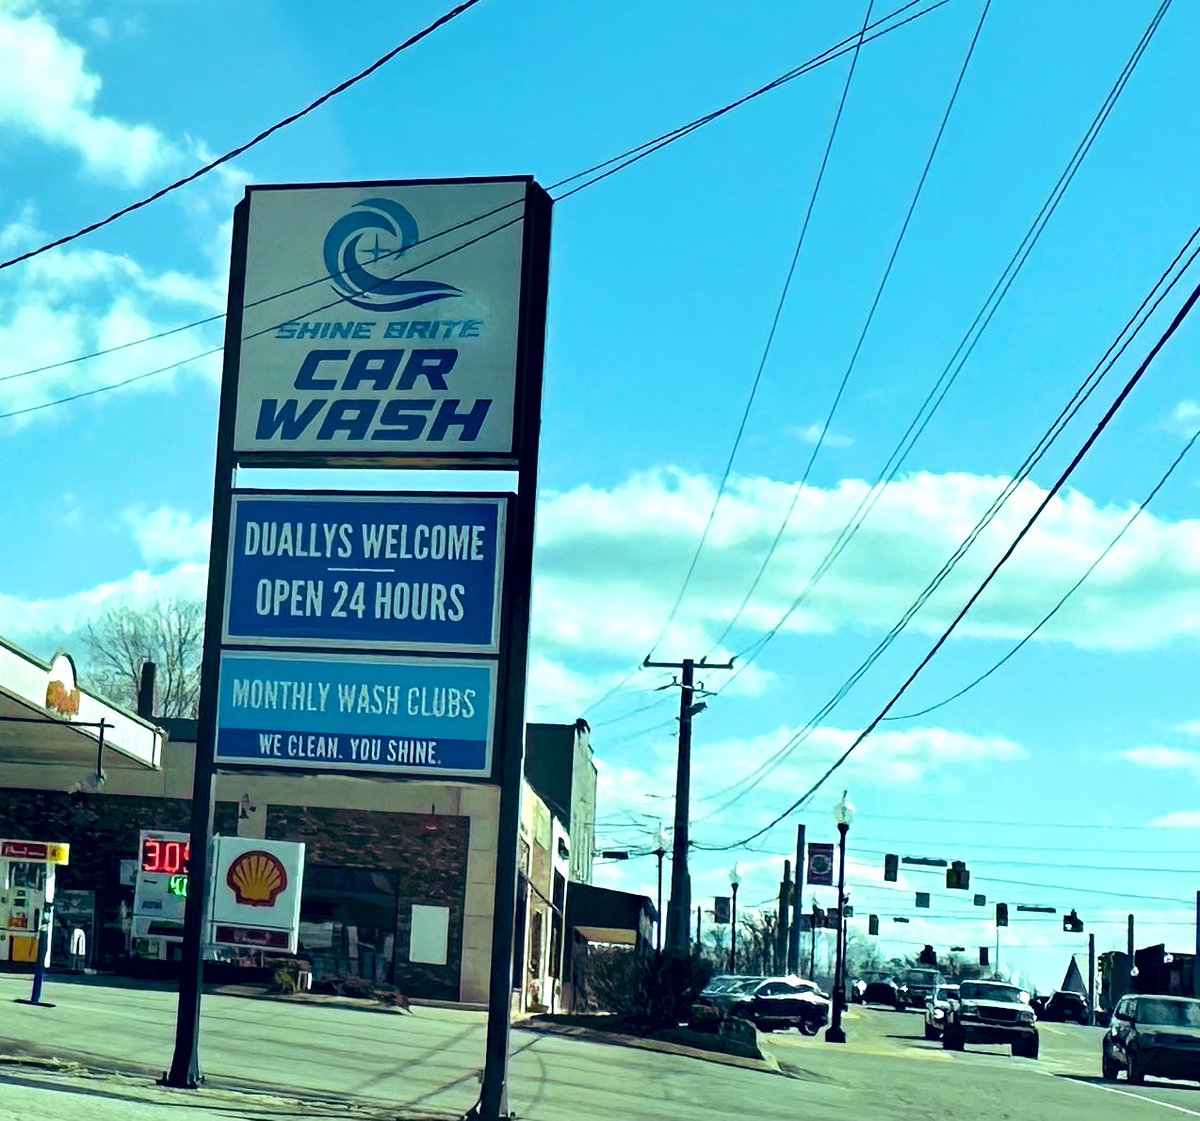 #Nashville, get your car washed at Shine Brite Car Wash and pay with #Bitcoin 

#circulareconomy #lightningnetwork #valueforvalue